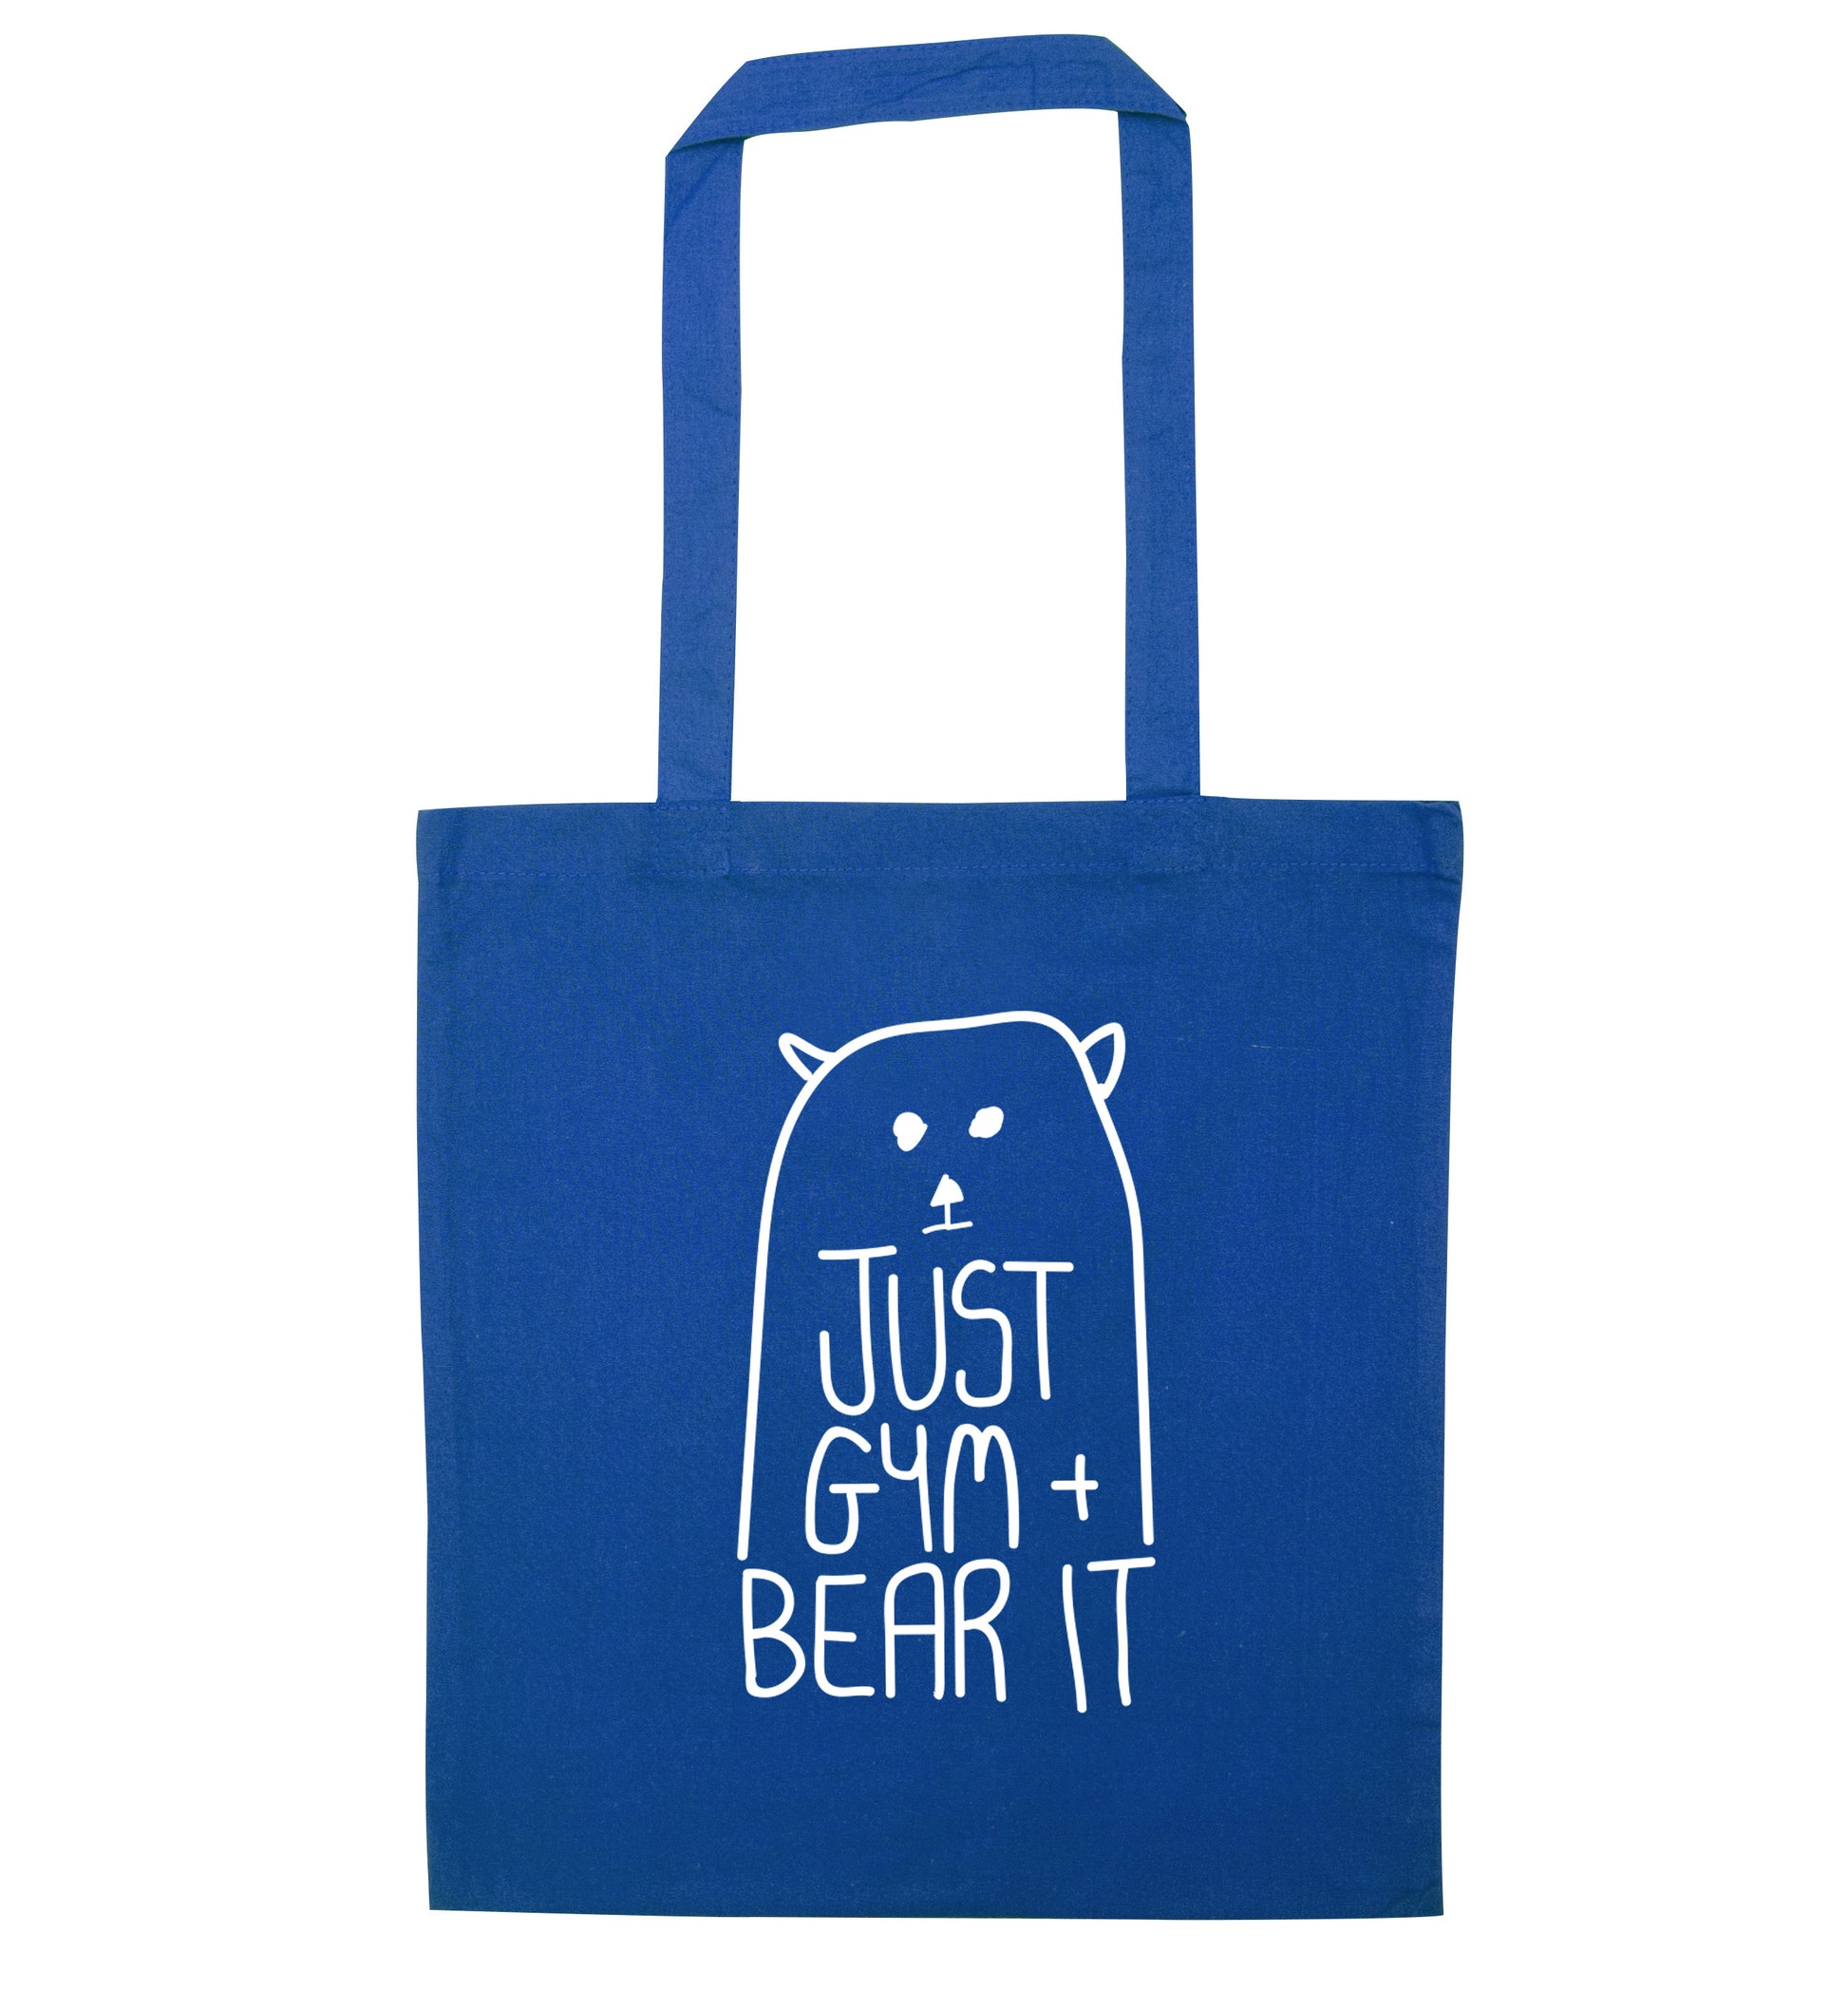 Just gym and bear it blue tote bag